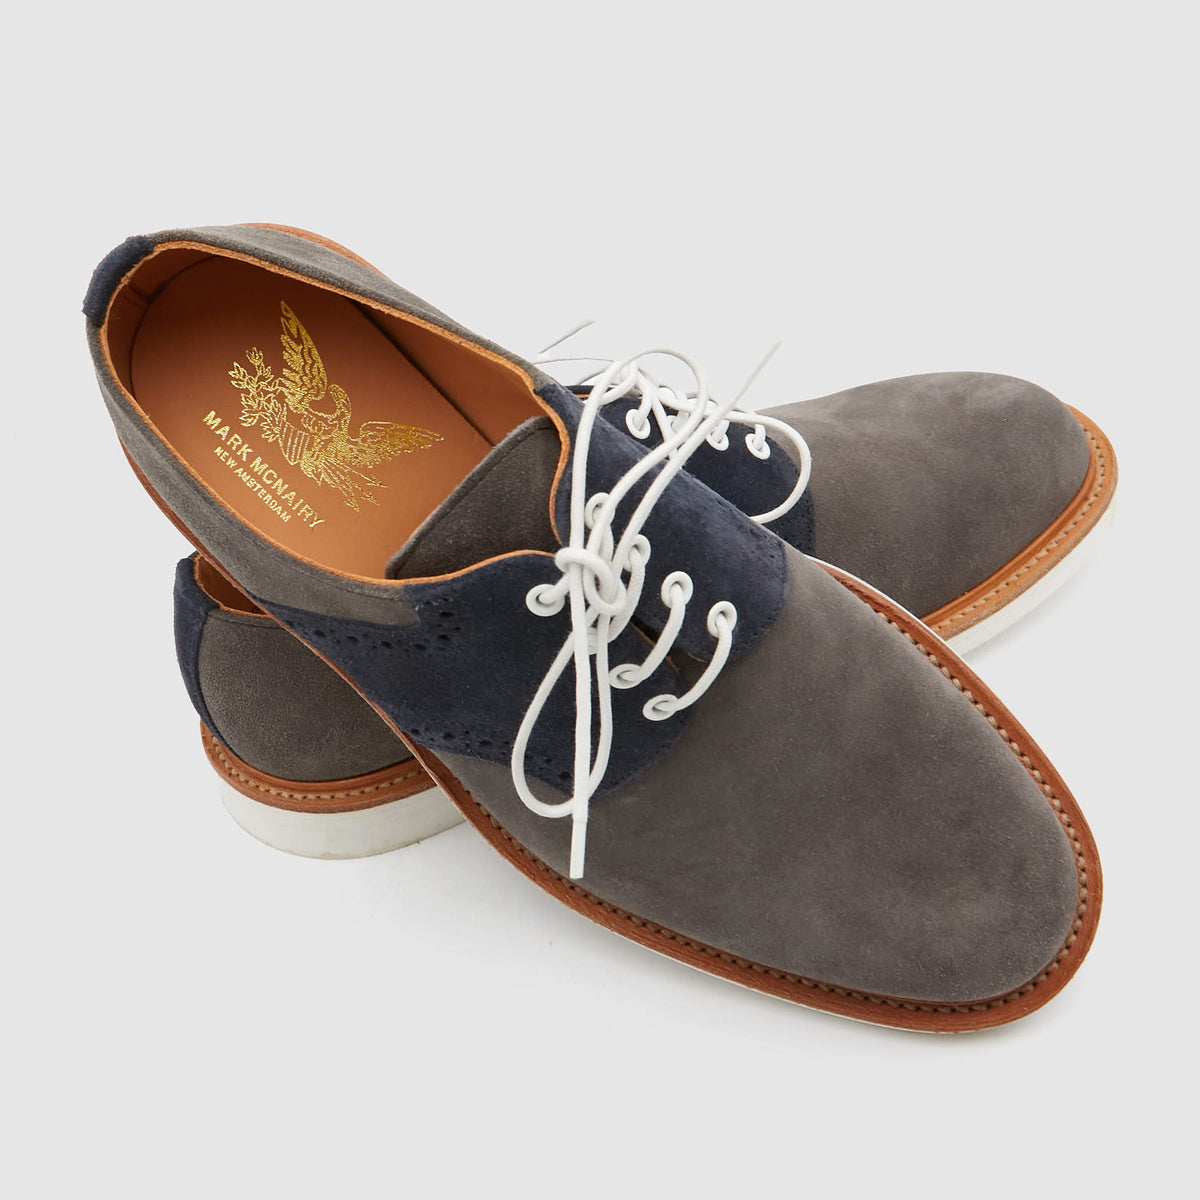 Mark McNairy Two Tone Suede Saddle Shoes